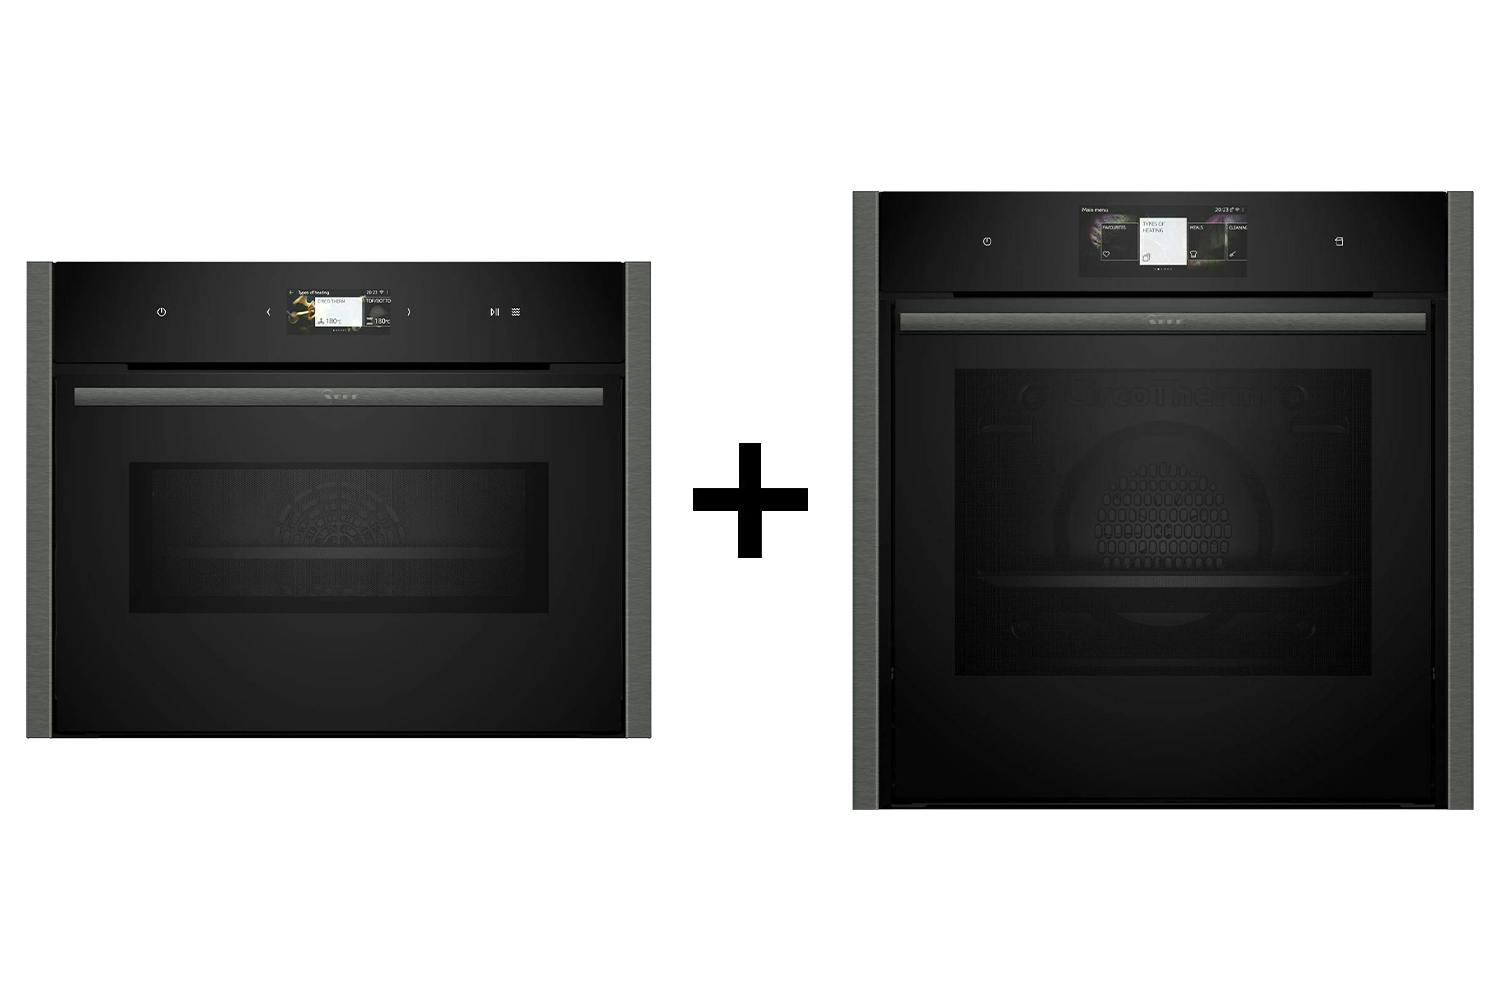 Neff N90 Built-in Compact Single Oven and N90 Slide and Hide Built-in Electric Single Oven Bundle